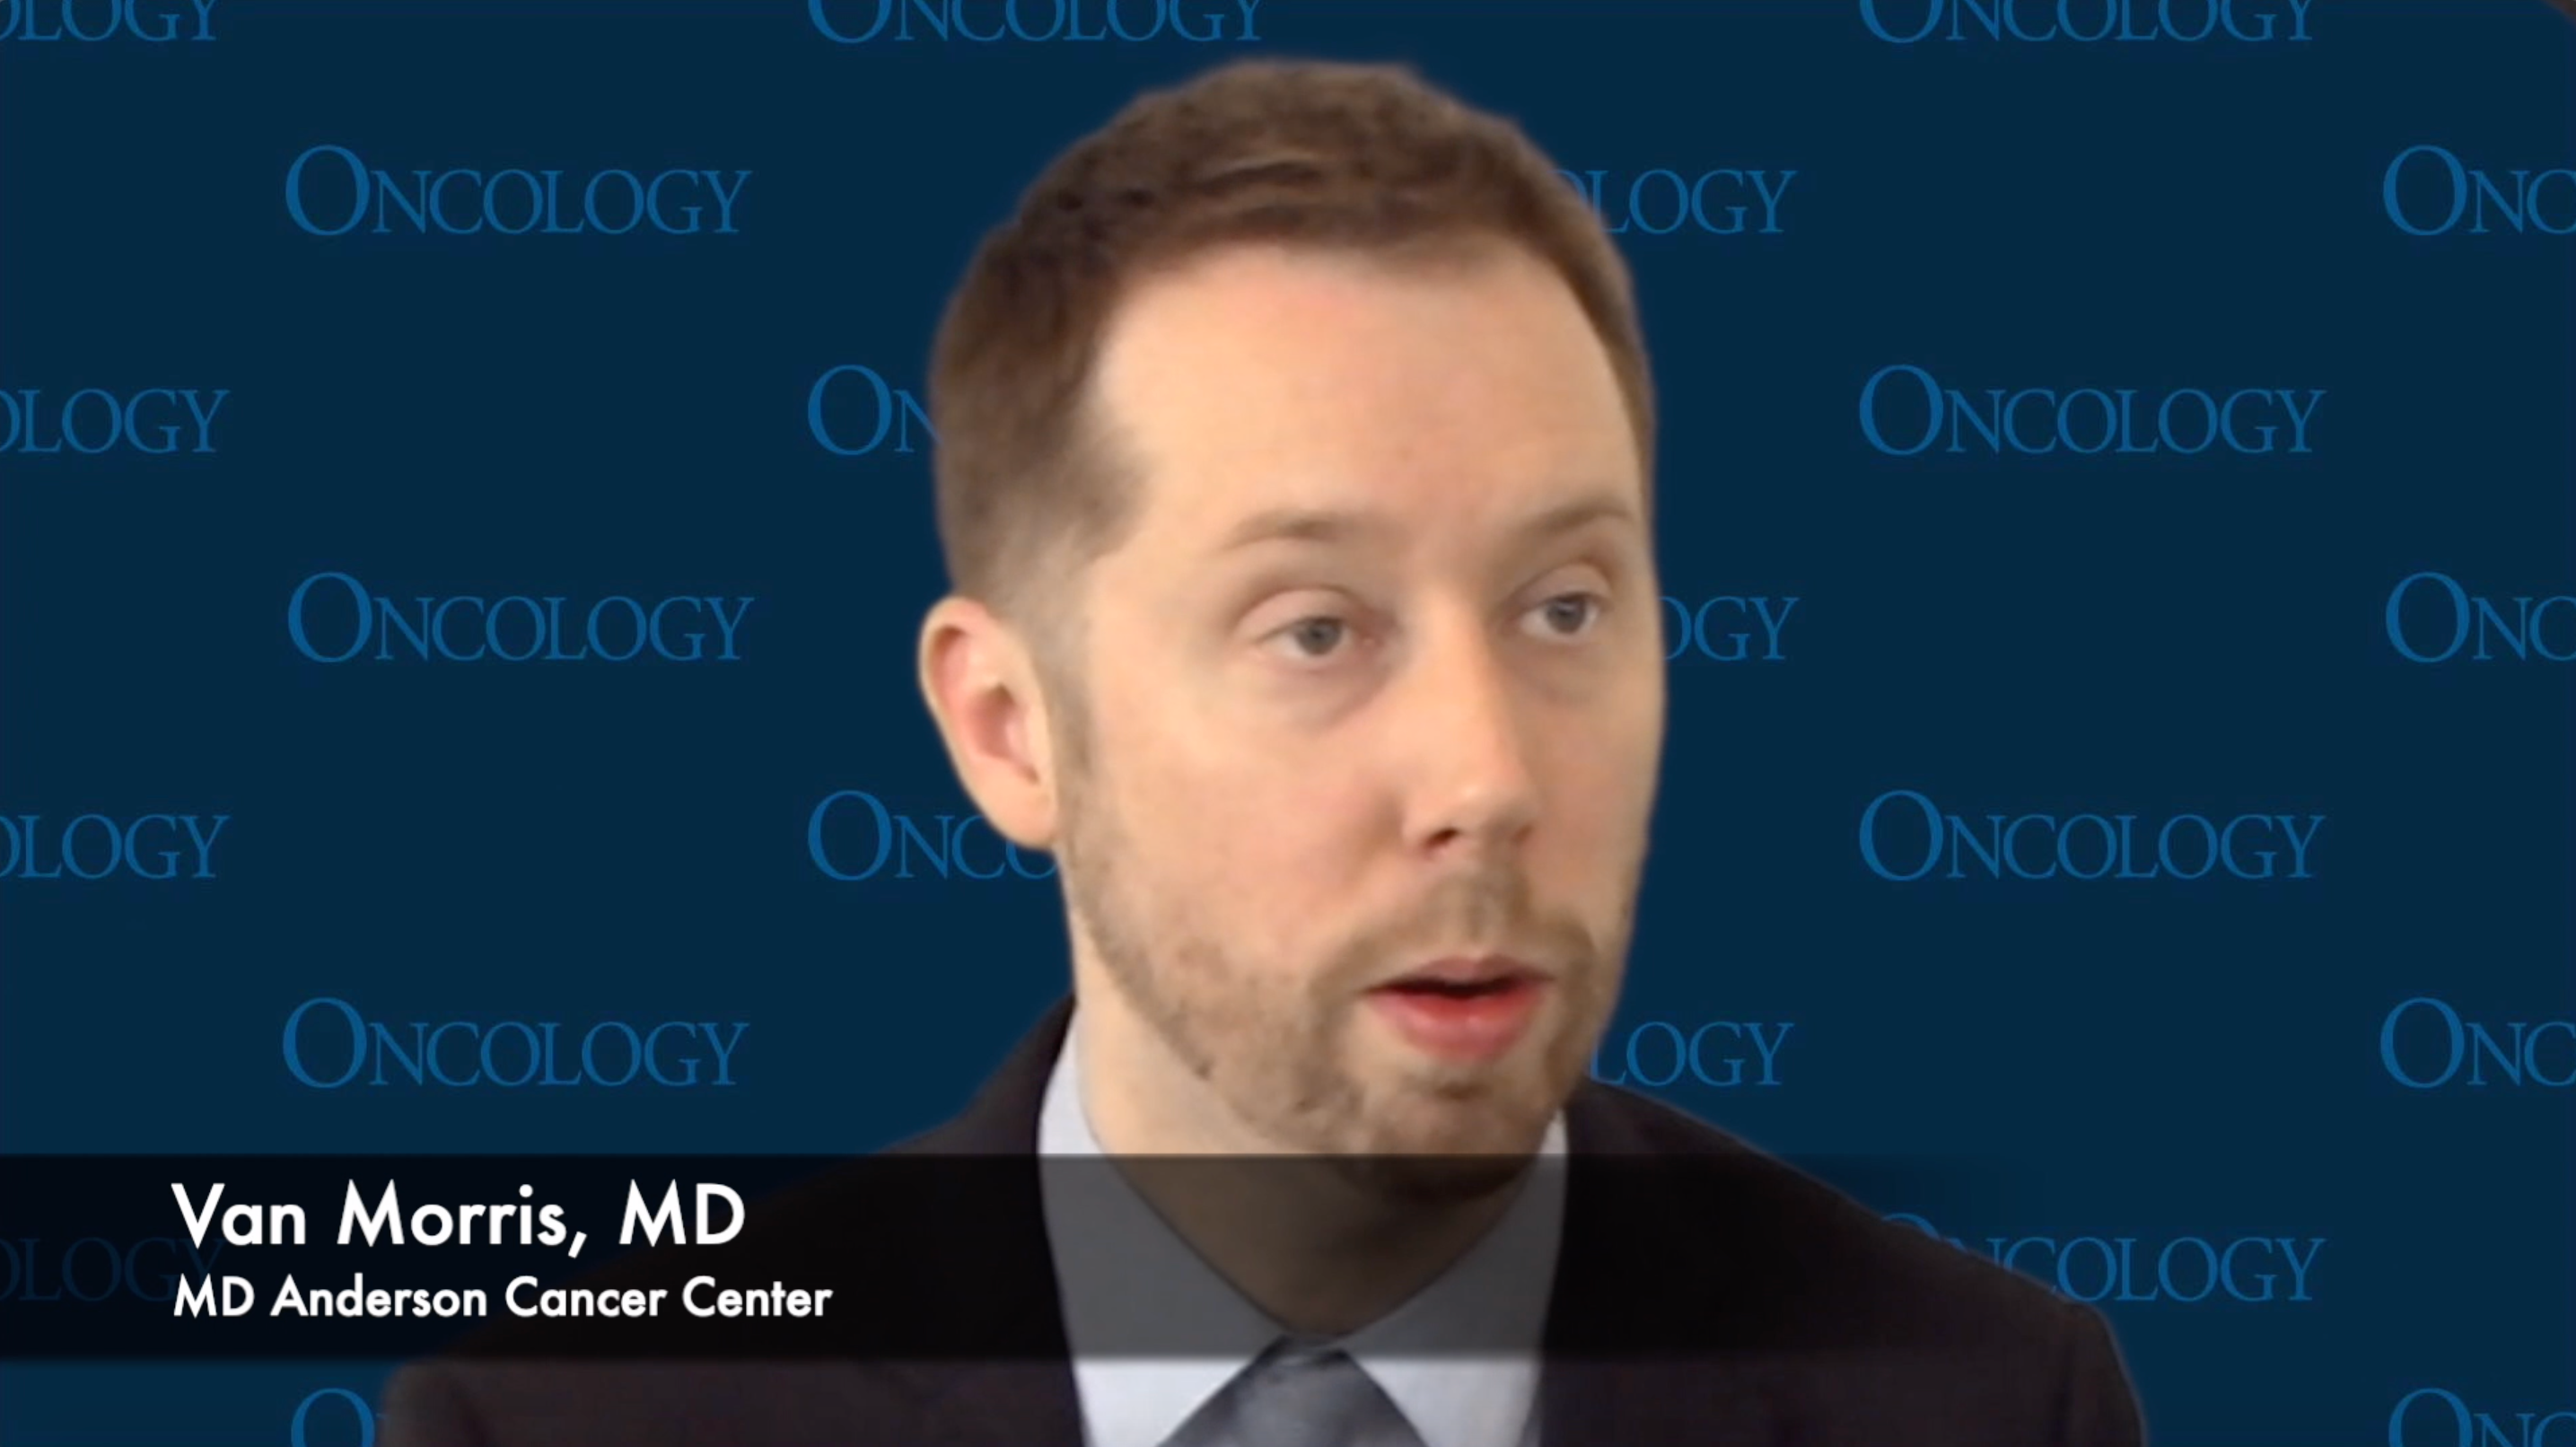 Van Morris, MD, Discusses Novel Therapies for Patients with Colorectal and Anal Cancer